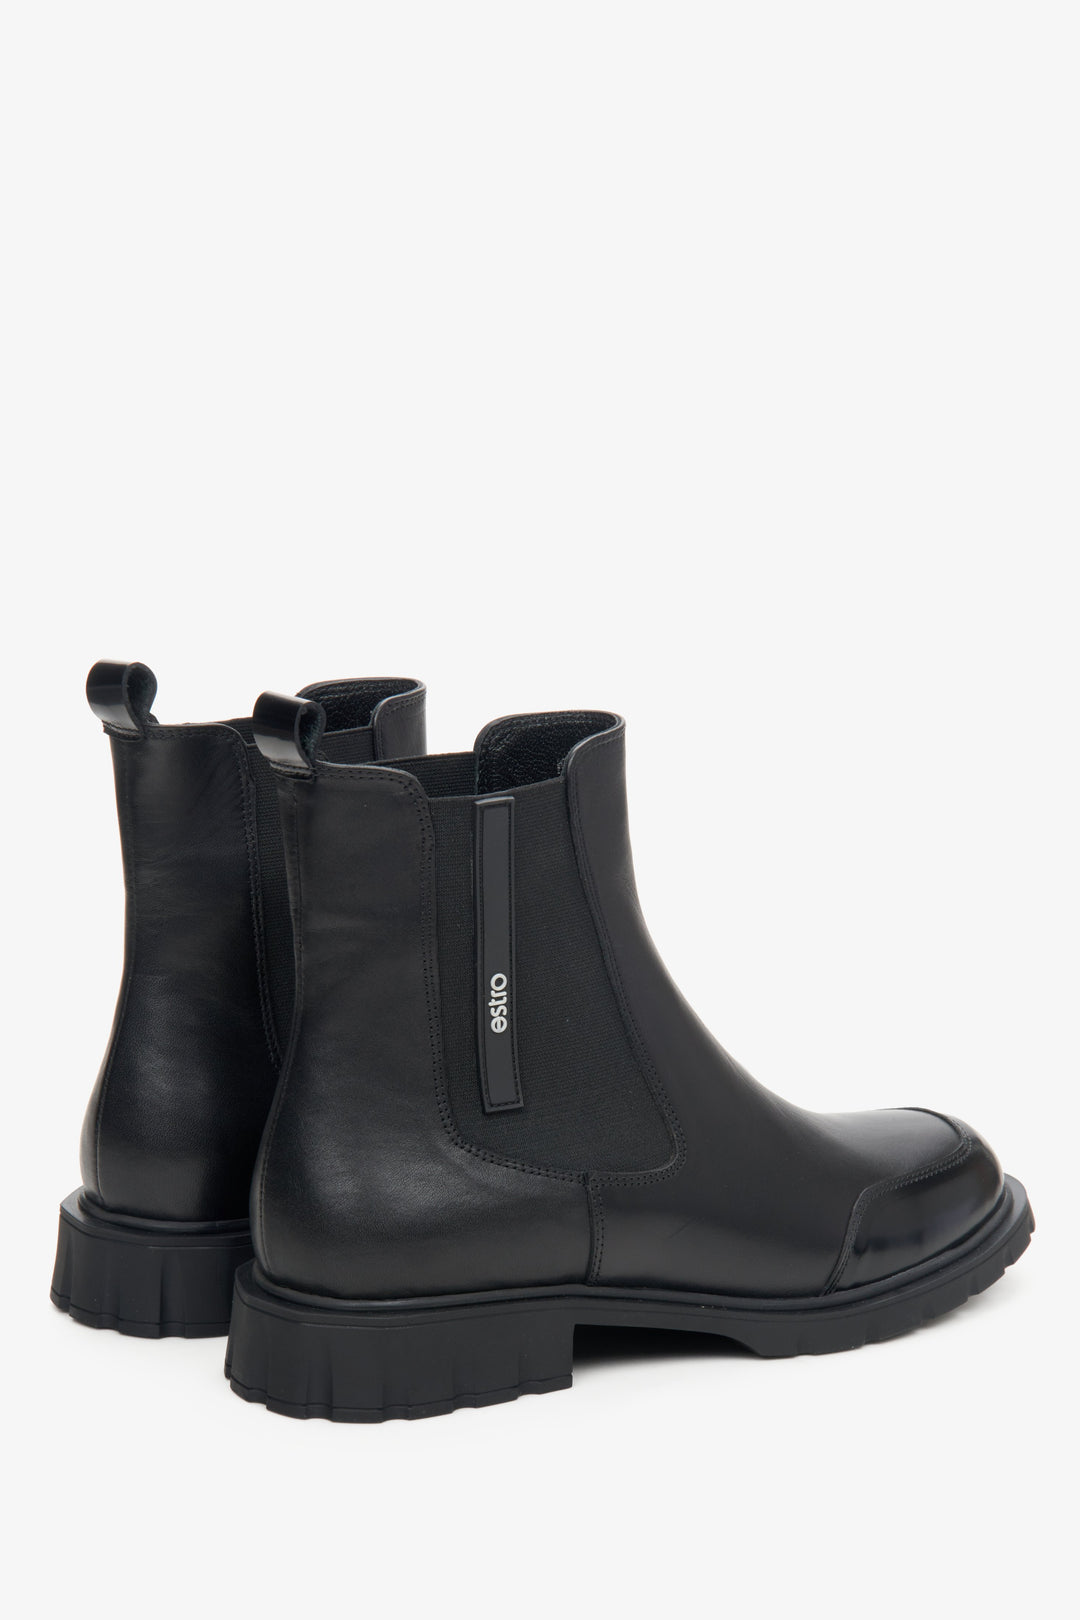 Women's black leather Chelsea boots by Estro - close-up on the side seam and heel counter.